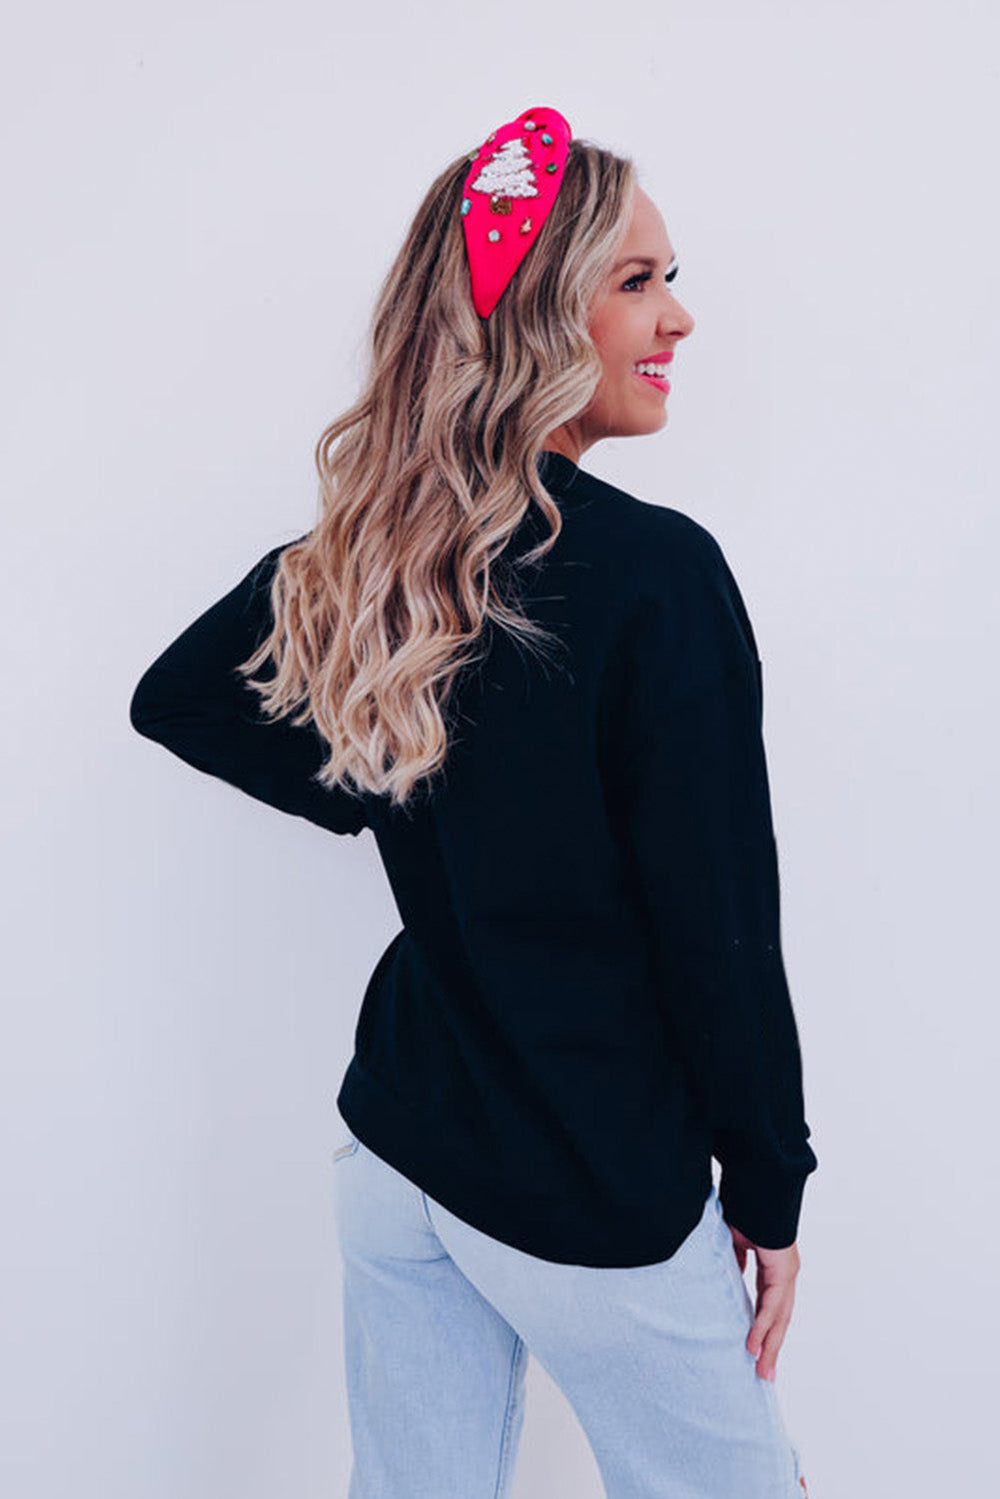 Black Casual holly jolly Round Neck Graphic Sweatshirt